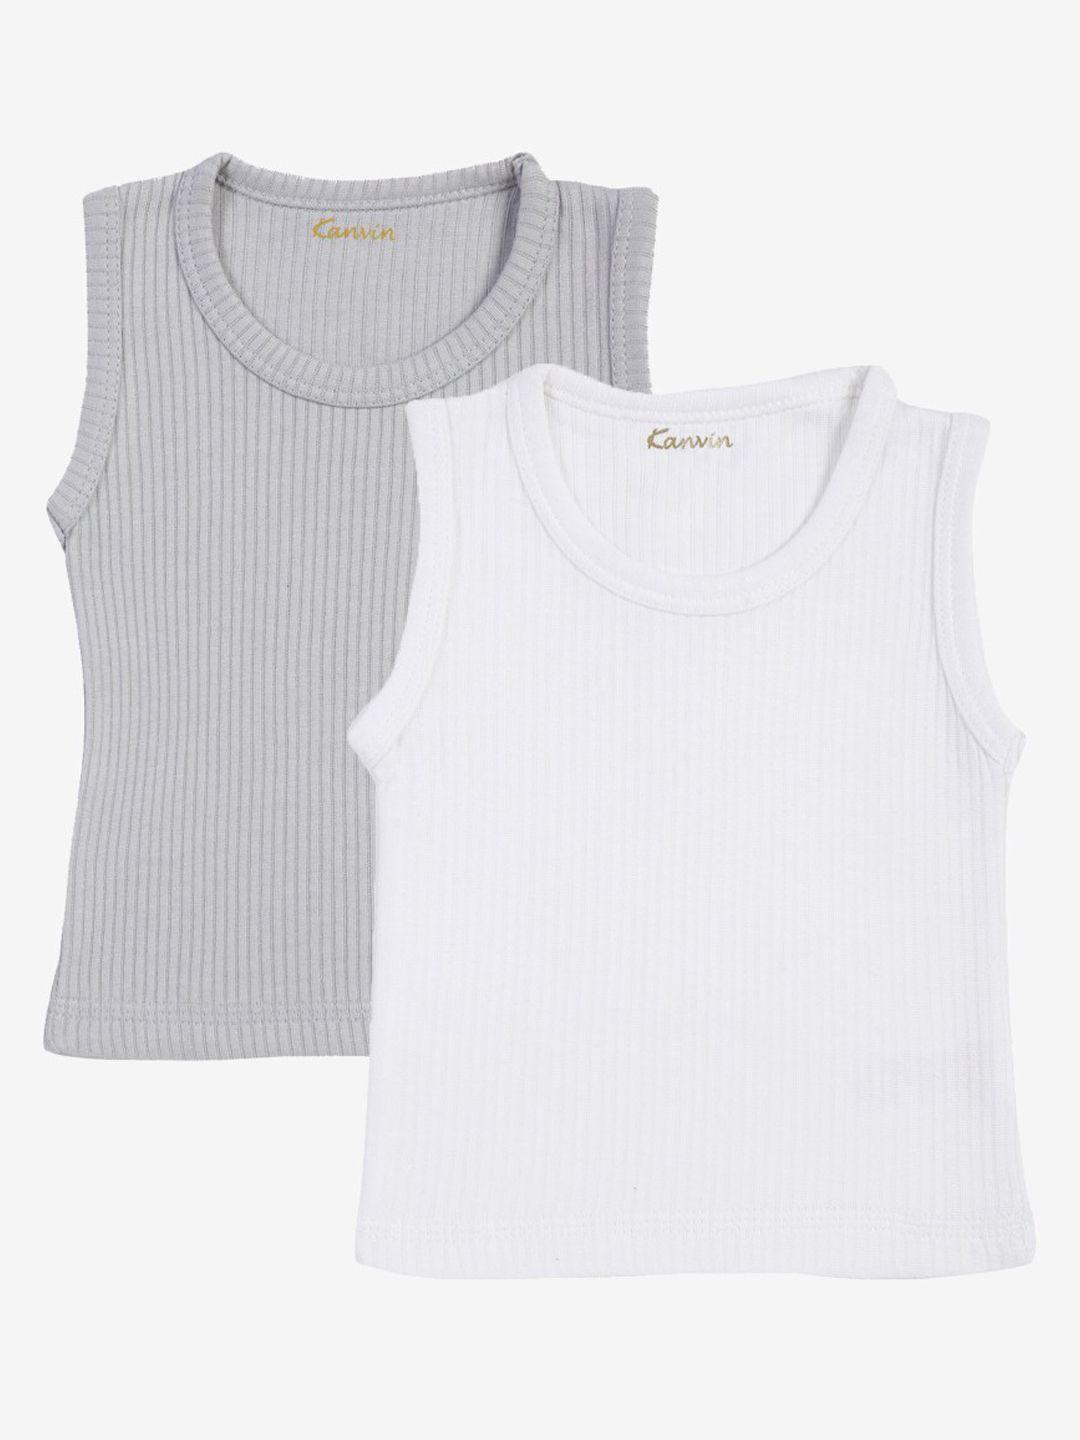 kanvin boys grey & white pack of 2  solid thermal tops